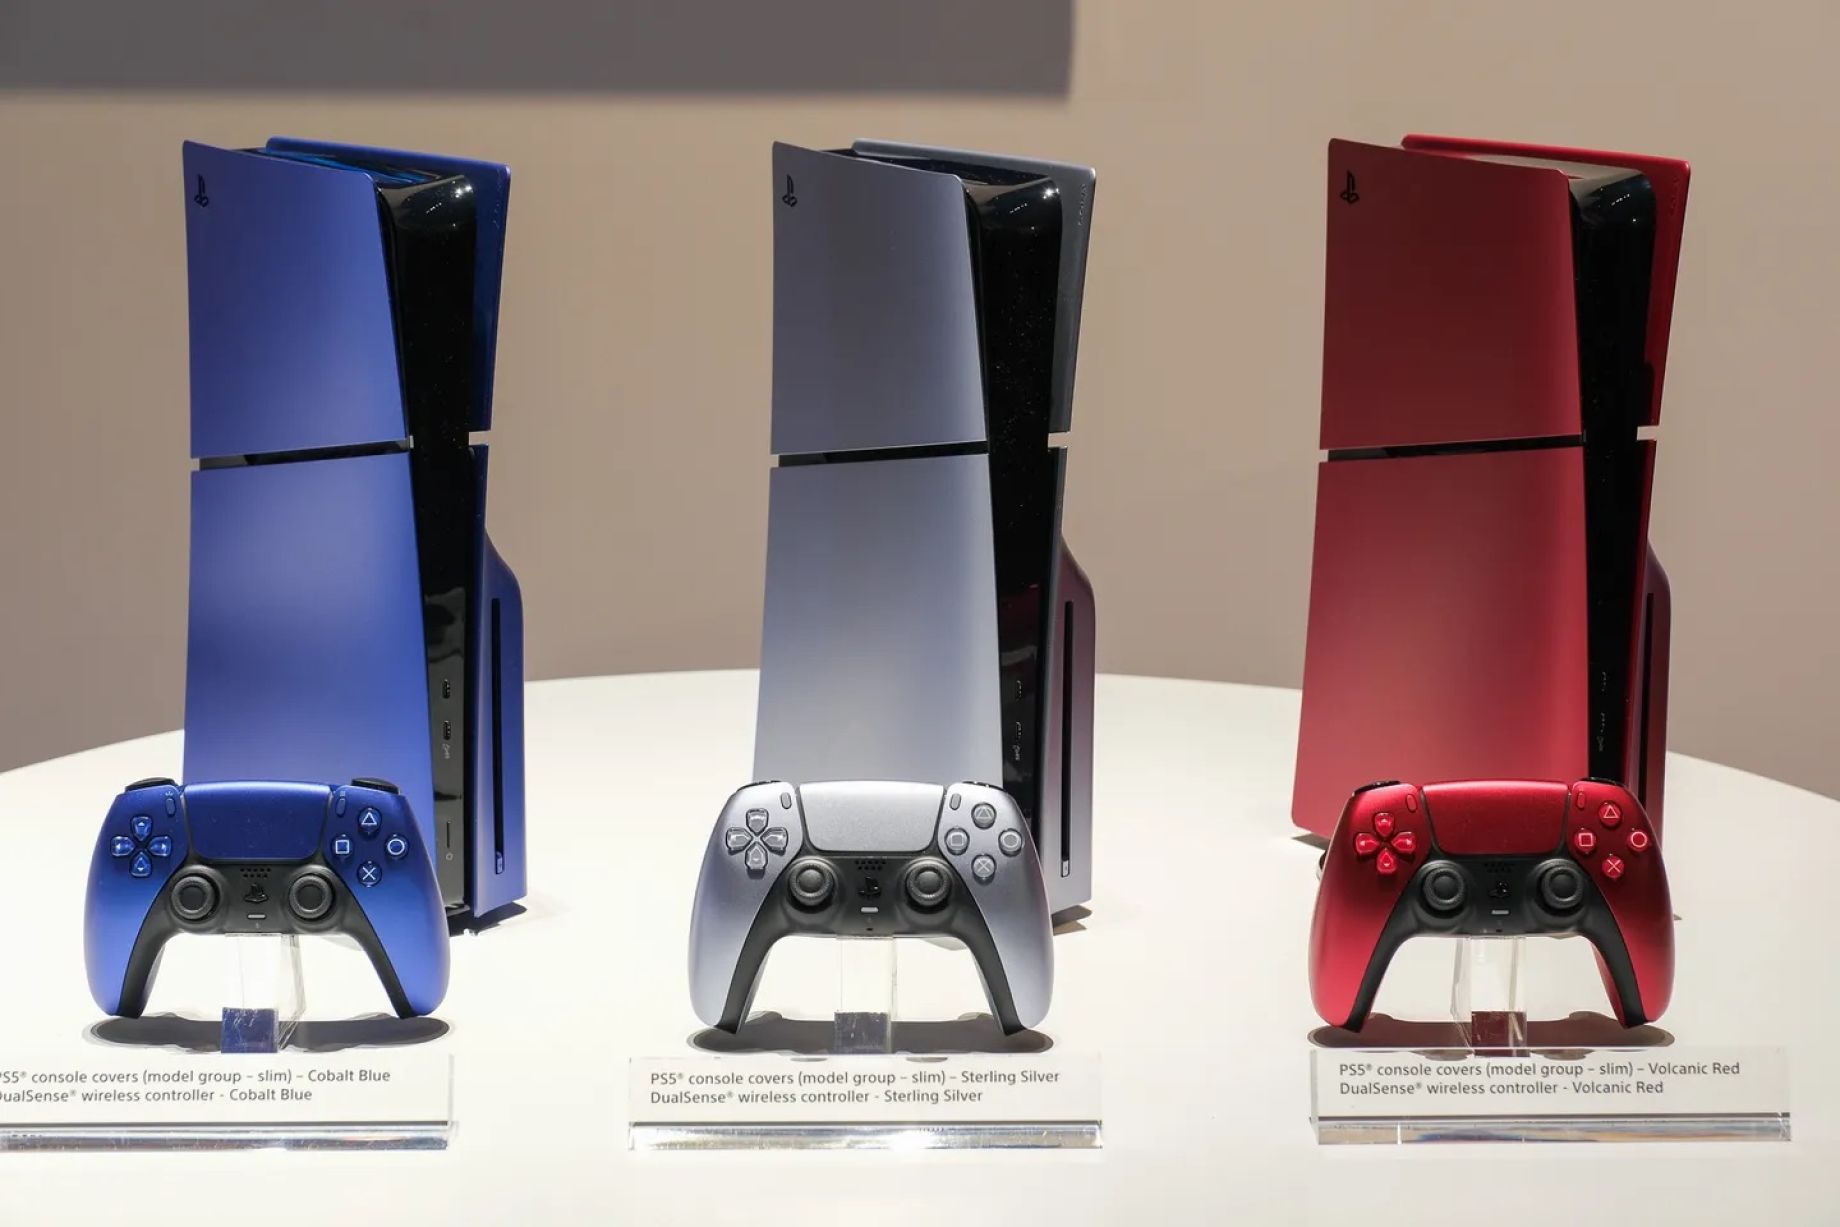 PlayStation 5 Slim Is More Stylish with New Colors